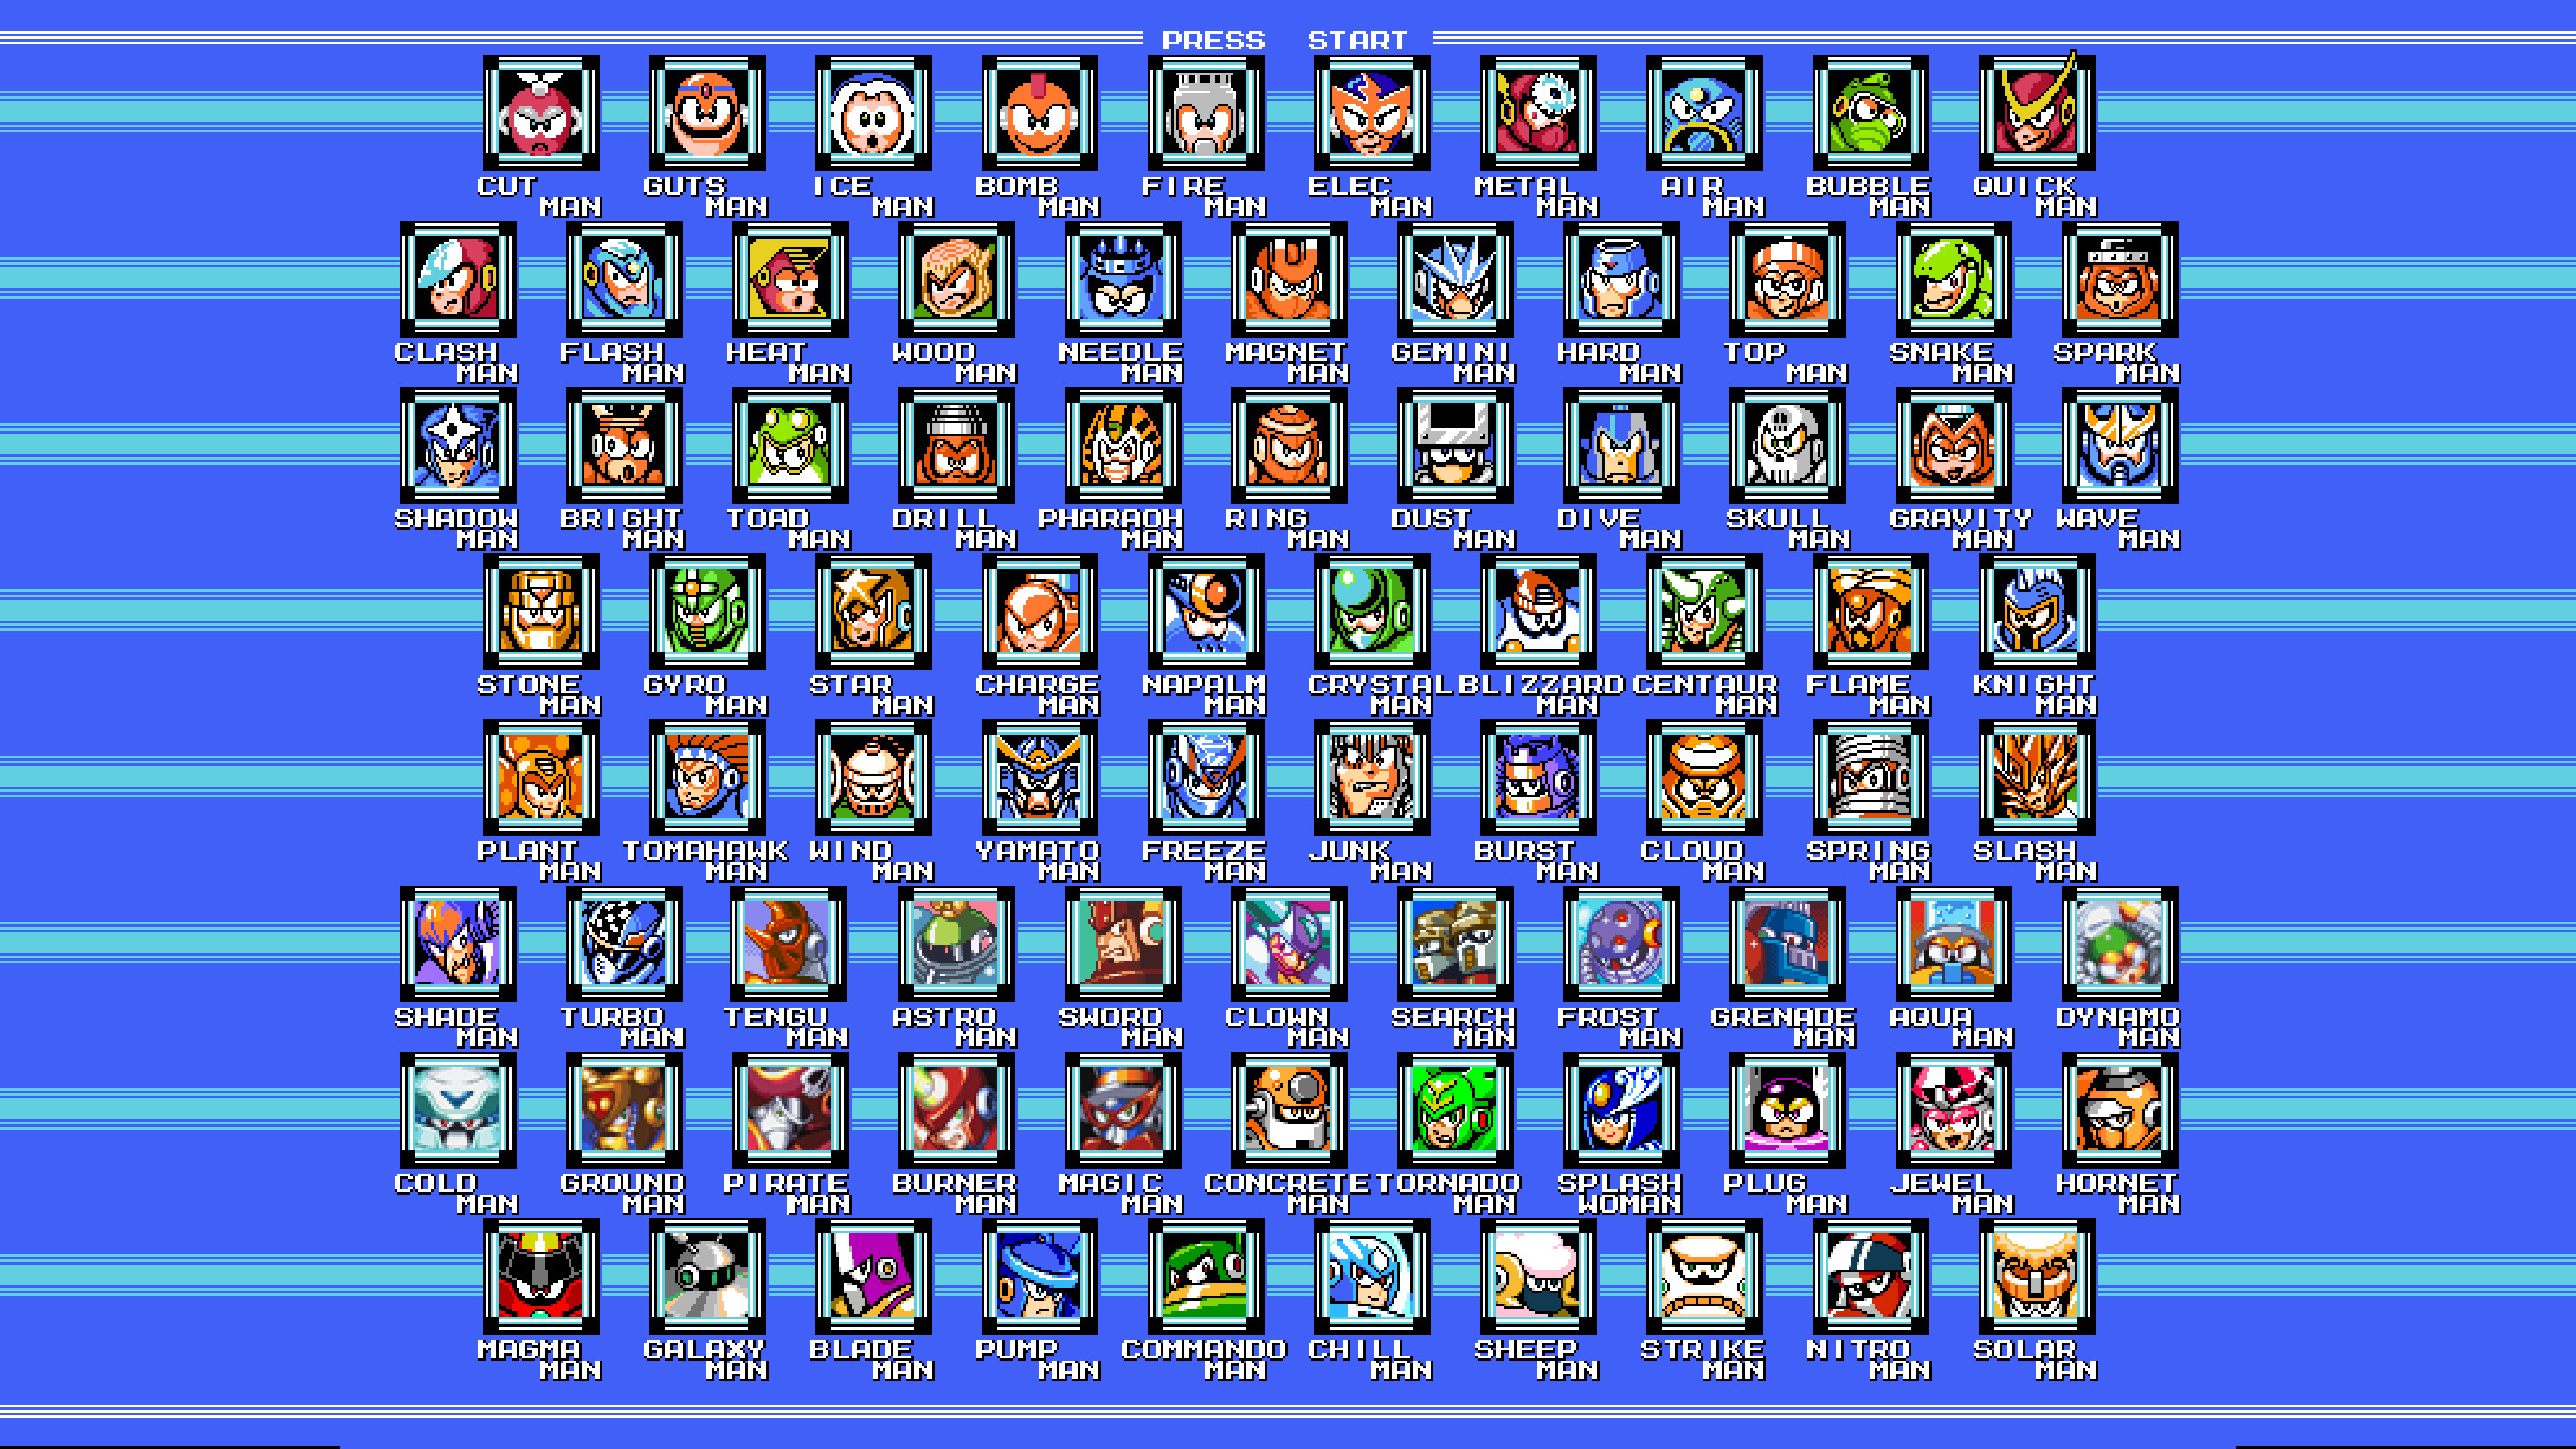 2976x1674 Fixed that wallpaper with all the robot masters: 16x9, all the MM10 bosses  and room for MM11 if it ever happens ...